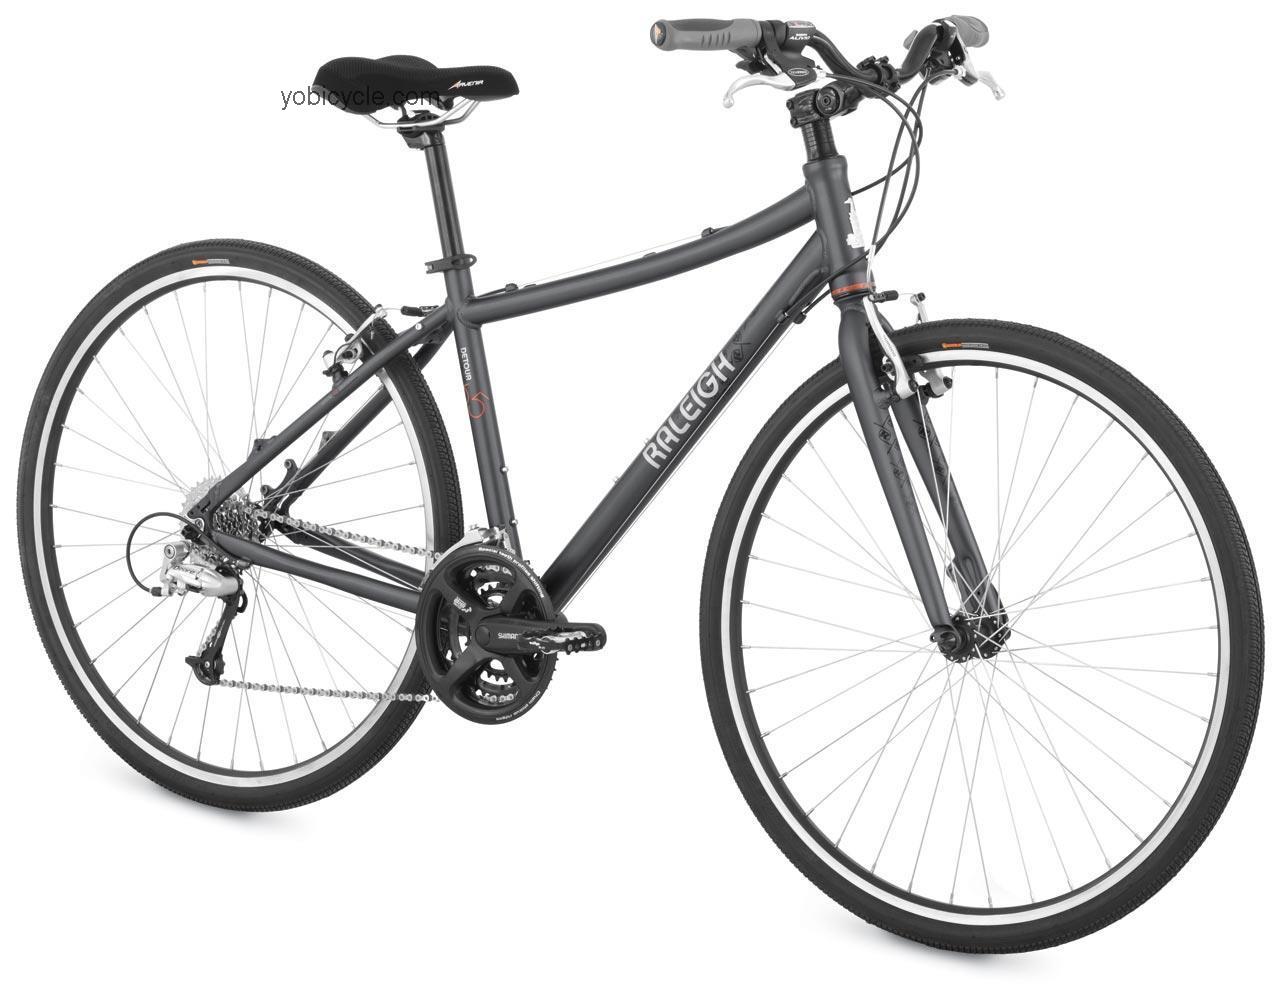 Raleigh Detour 6.5 2009 comparison online with competitors